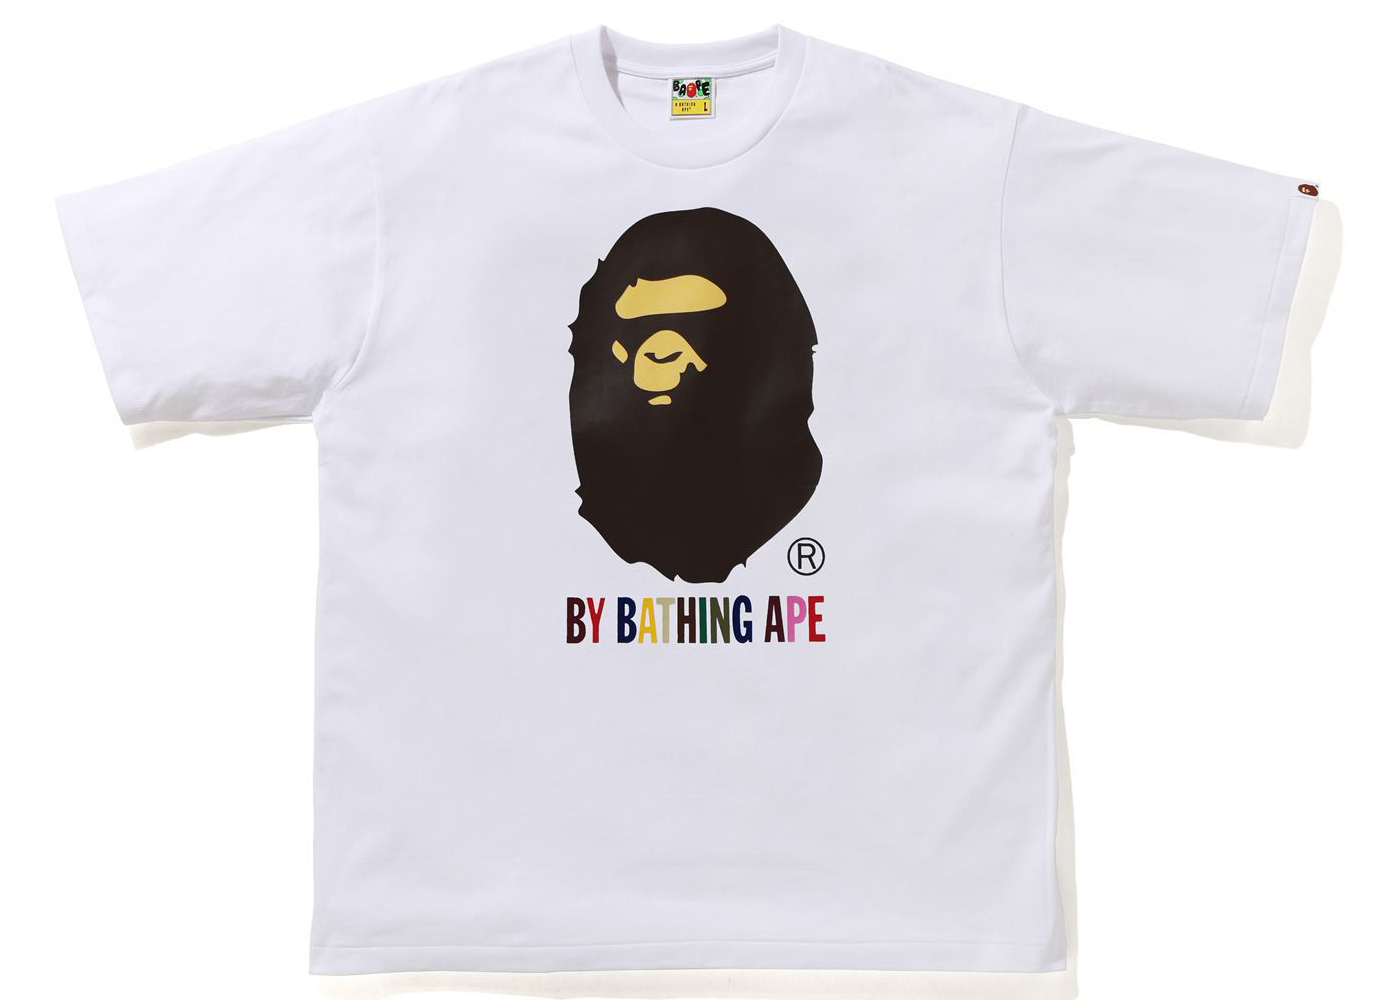 BAPE By Bathing Ape Relaxed Fit Tee Black Men's - SS23 - US